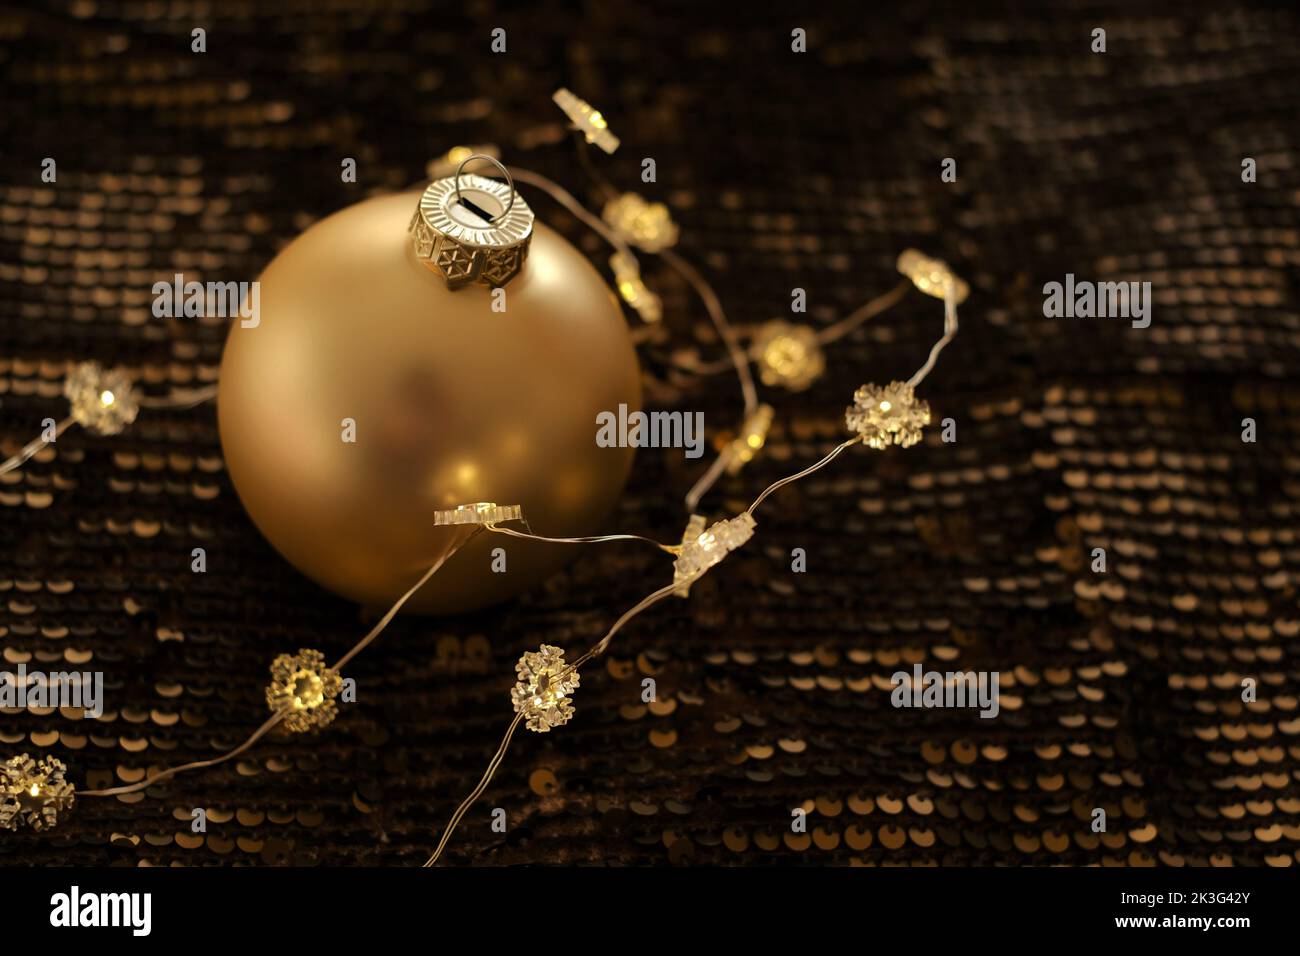 Sparkling Golden balls and glowing garlands on brown sequins background.Christmas balls background.Festive background in Gold and brown tones. Stock Photo